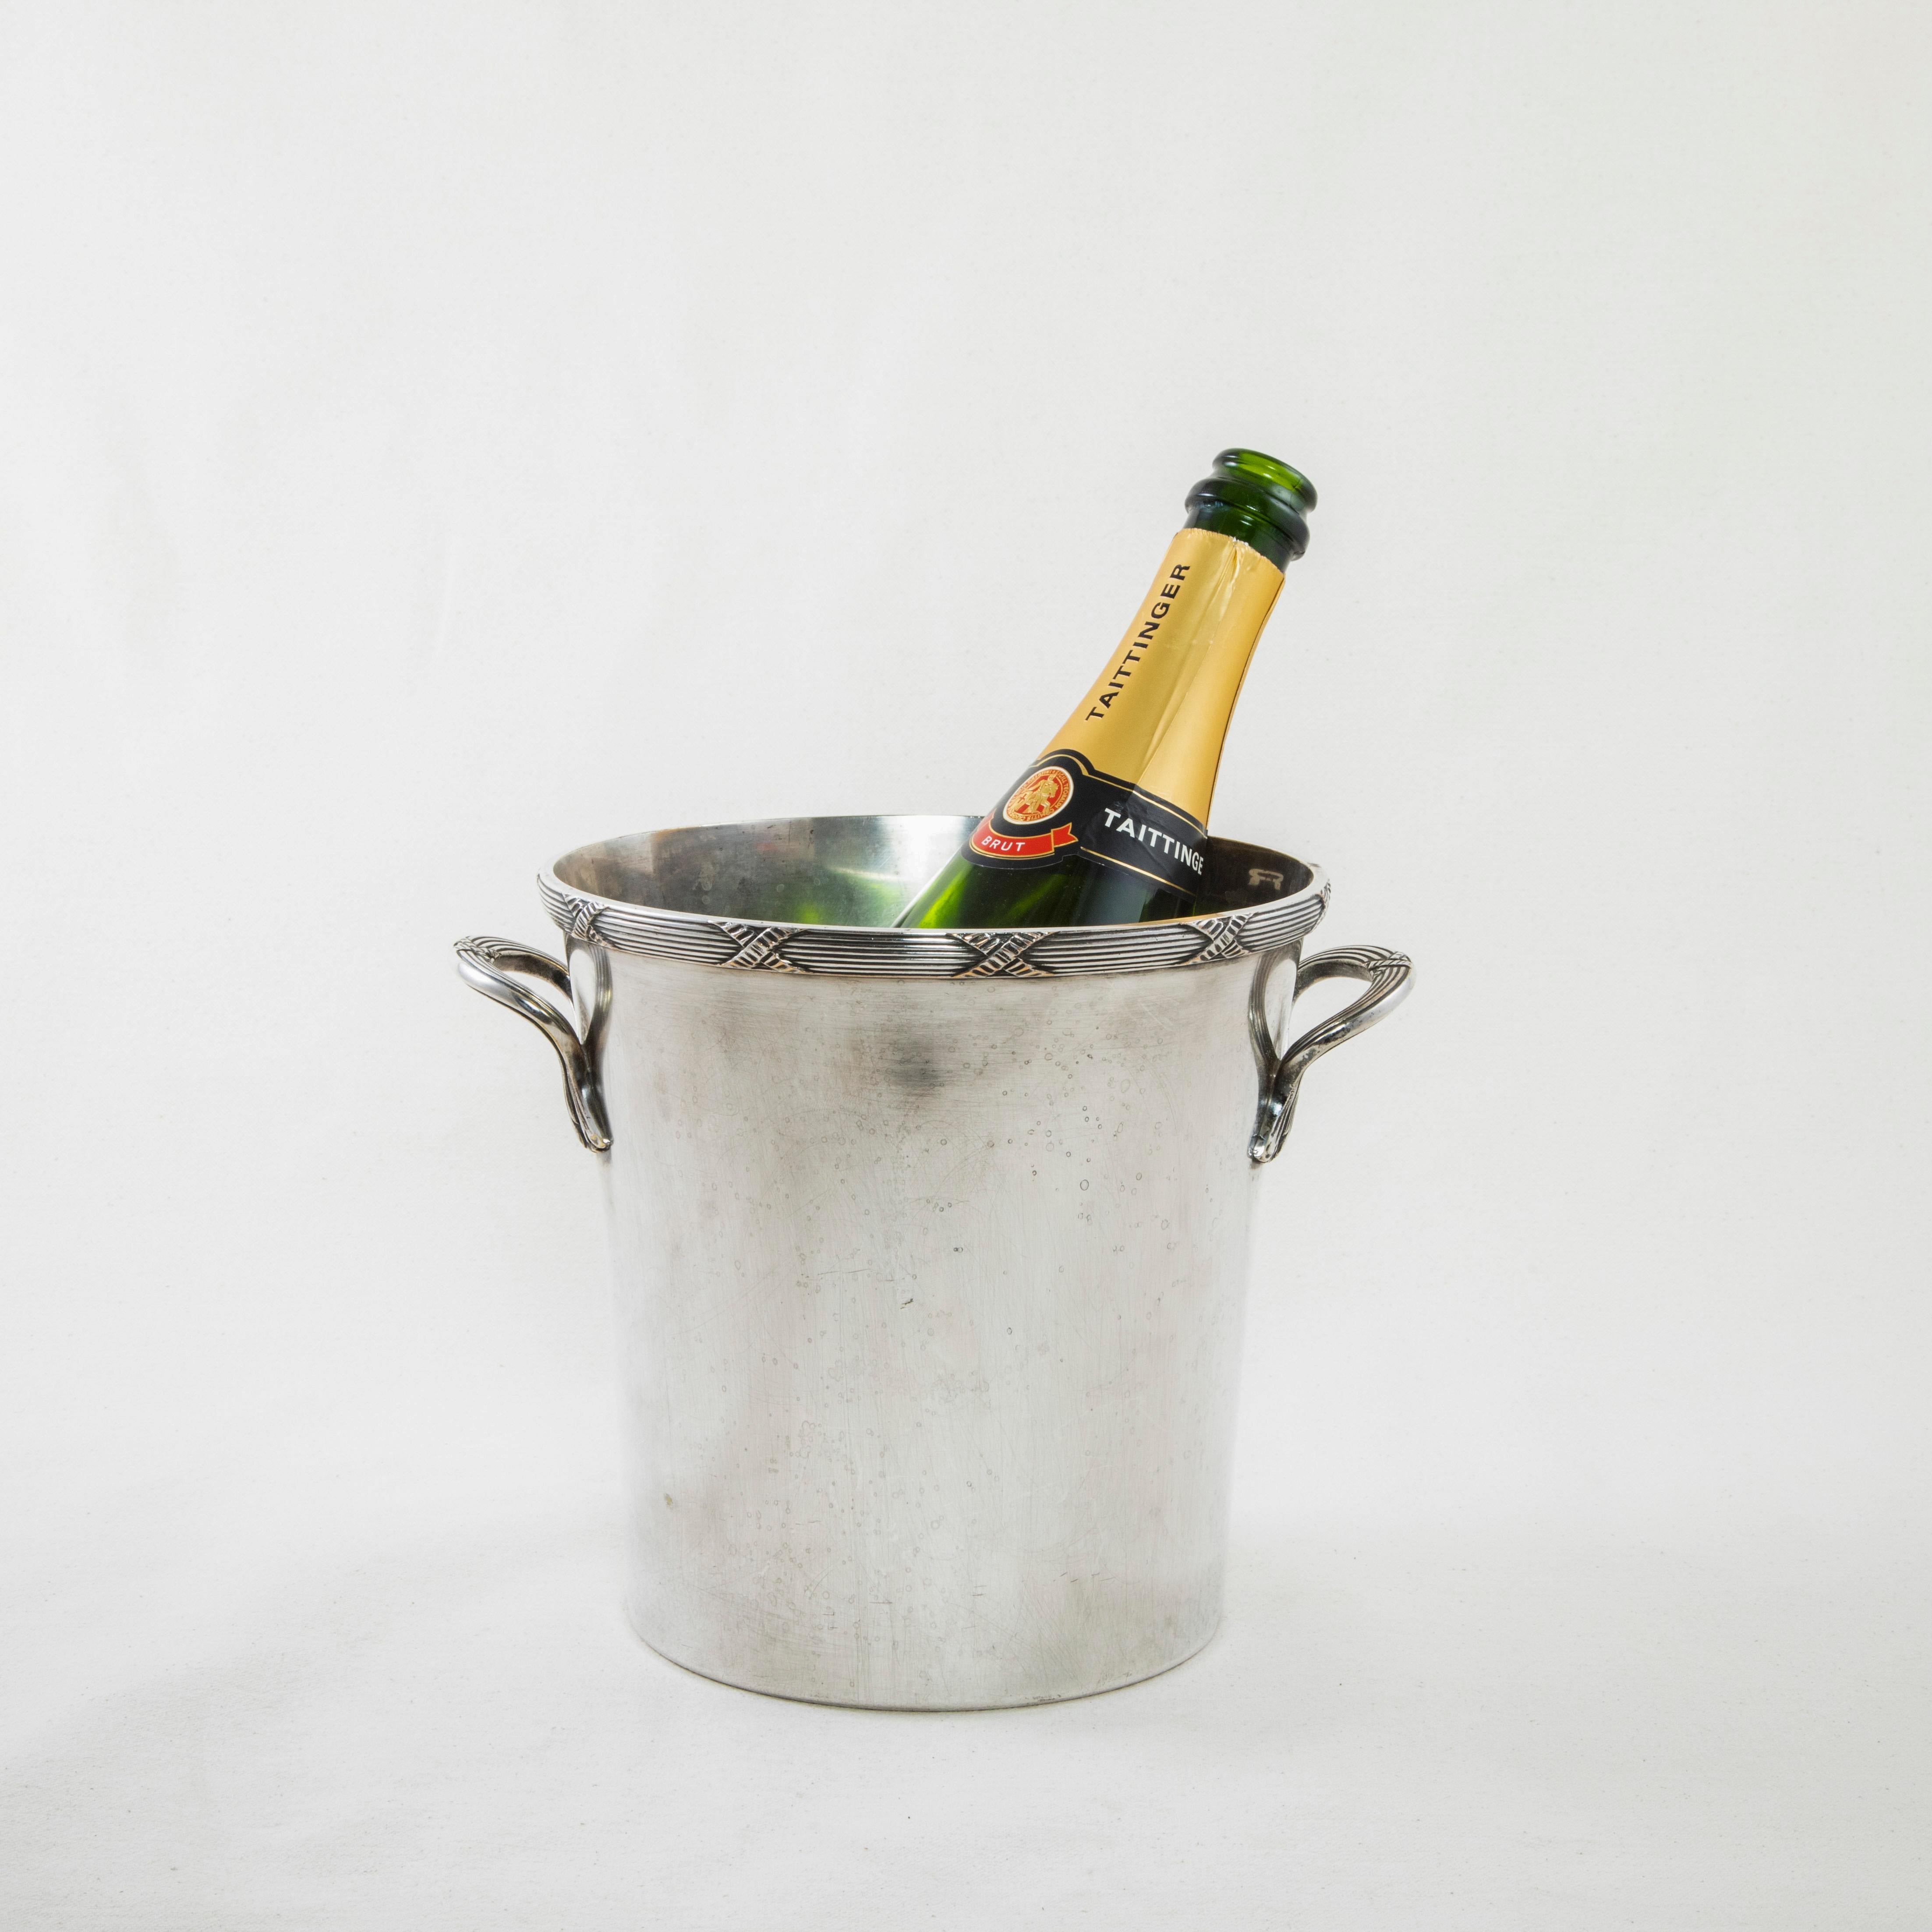 This French silver plate champagne bucket or wine chiller features a fluted upper rim detailed with Louis XVI crossed ribbons. Two handles with stylized leaves are further detailed with the Louis XVI motif. It is stamped on the bottom with the